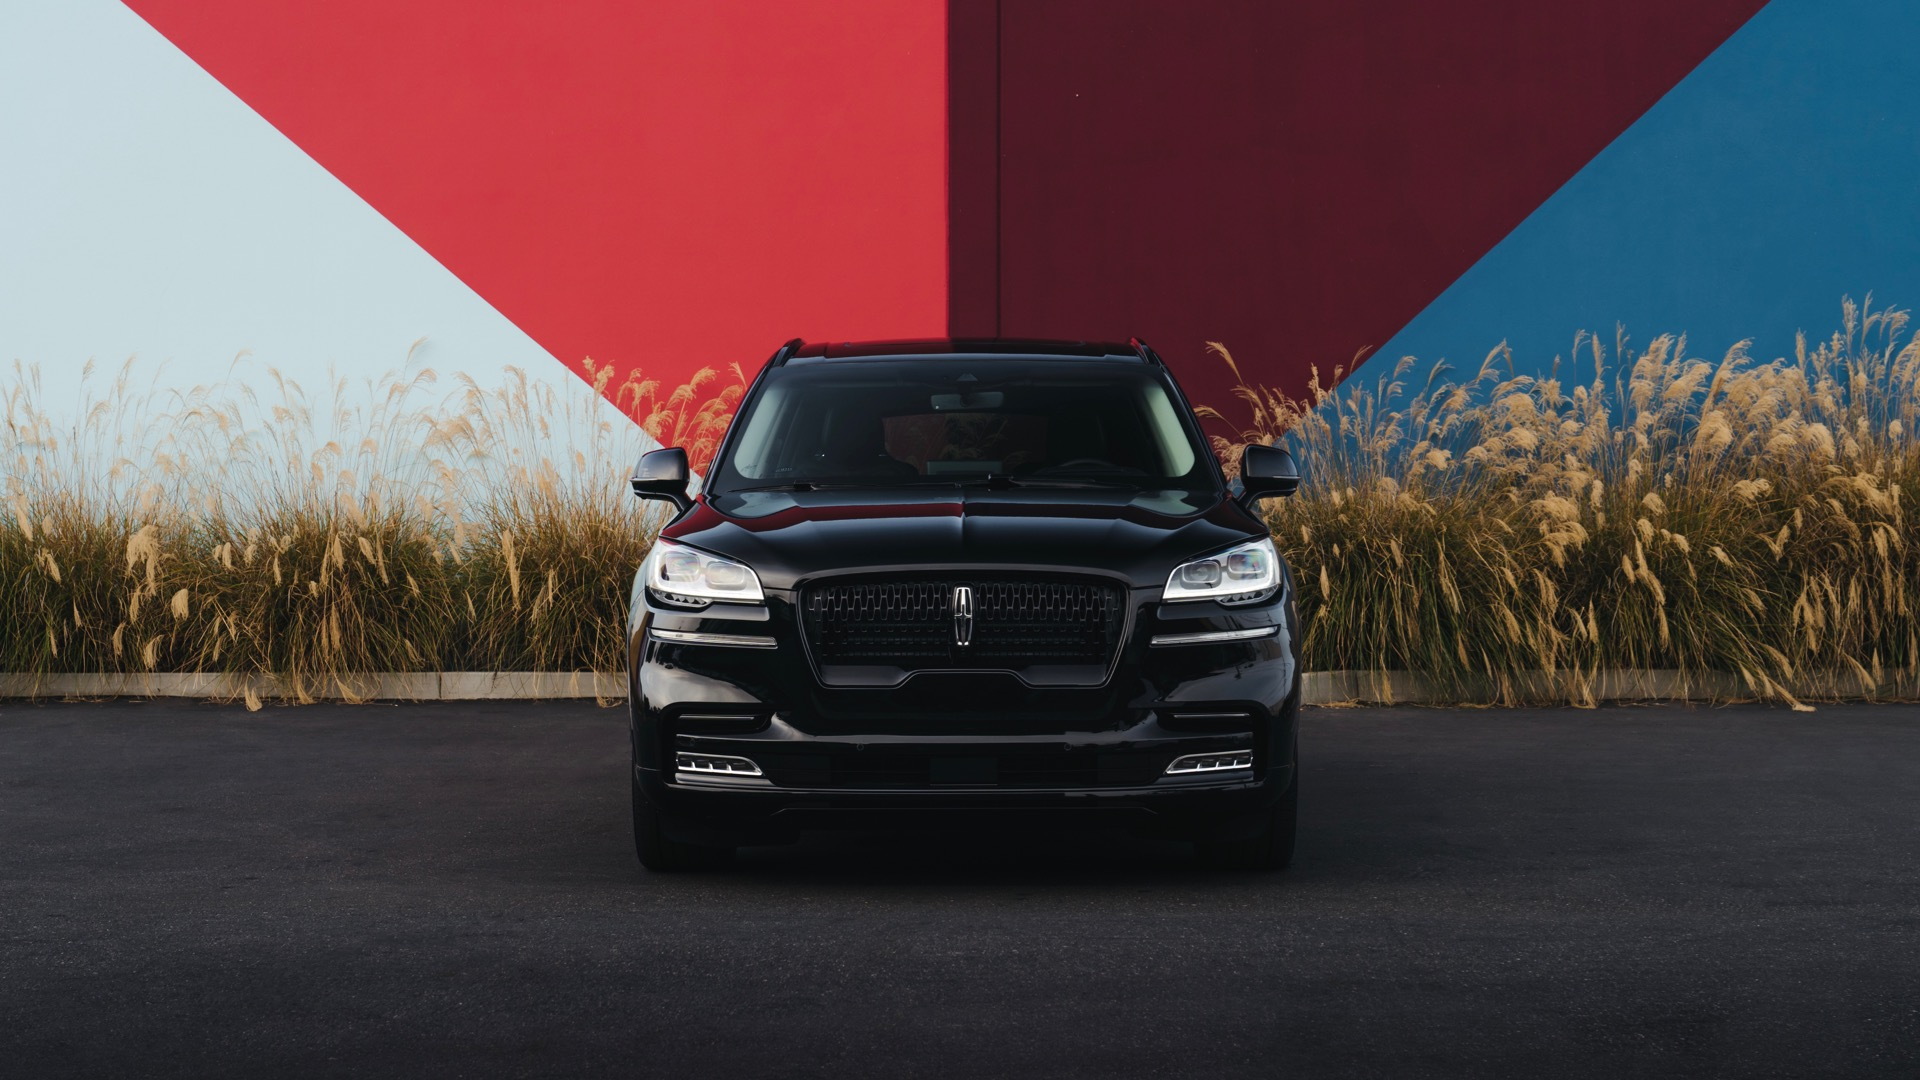 2022 Lincoln Aviator with Jet Appearance Package